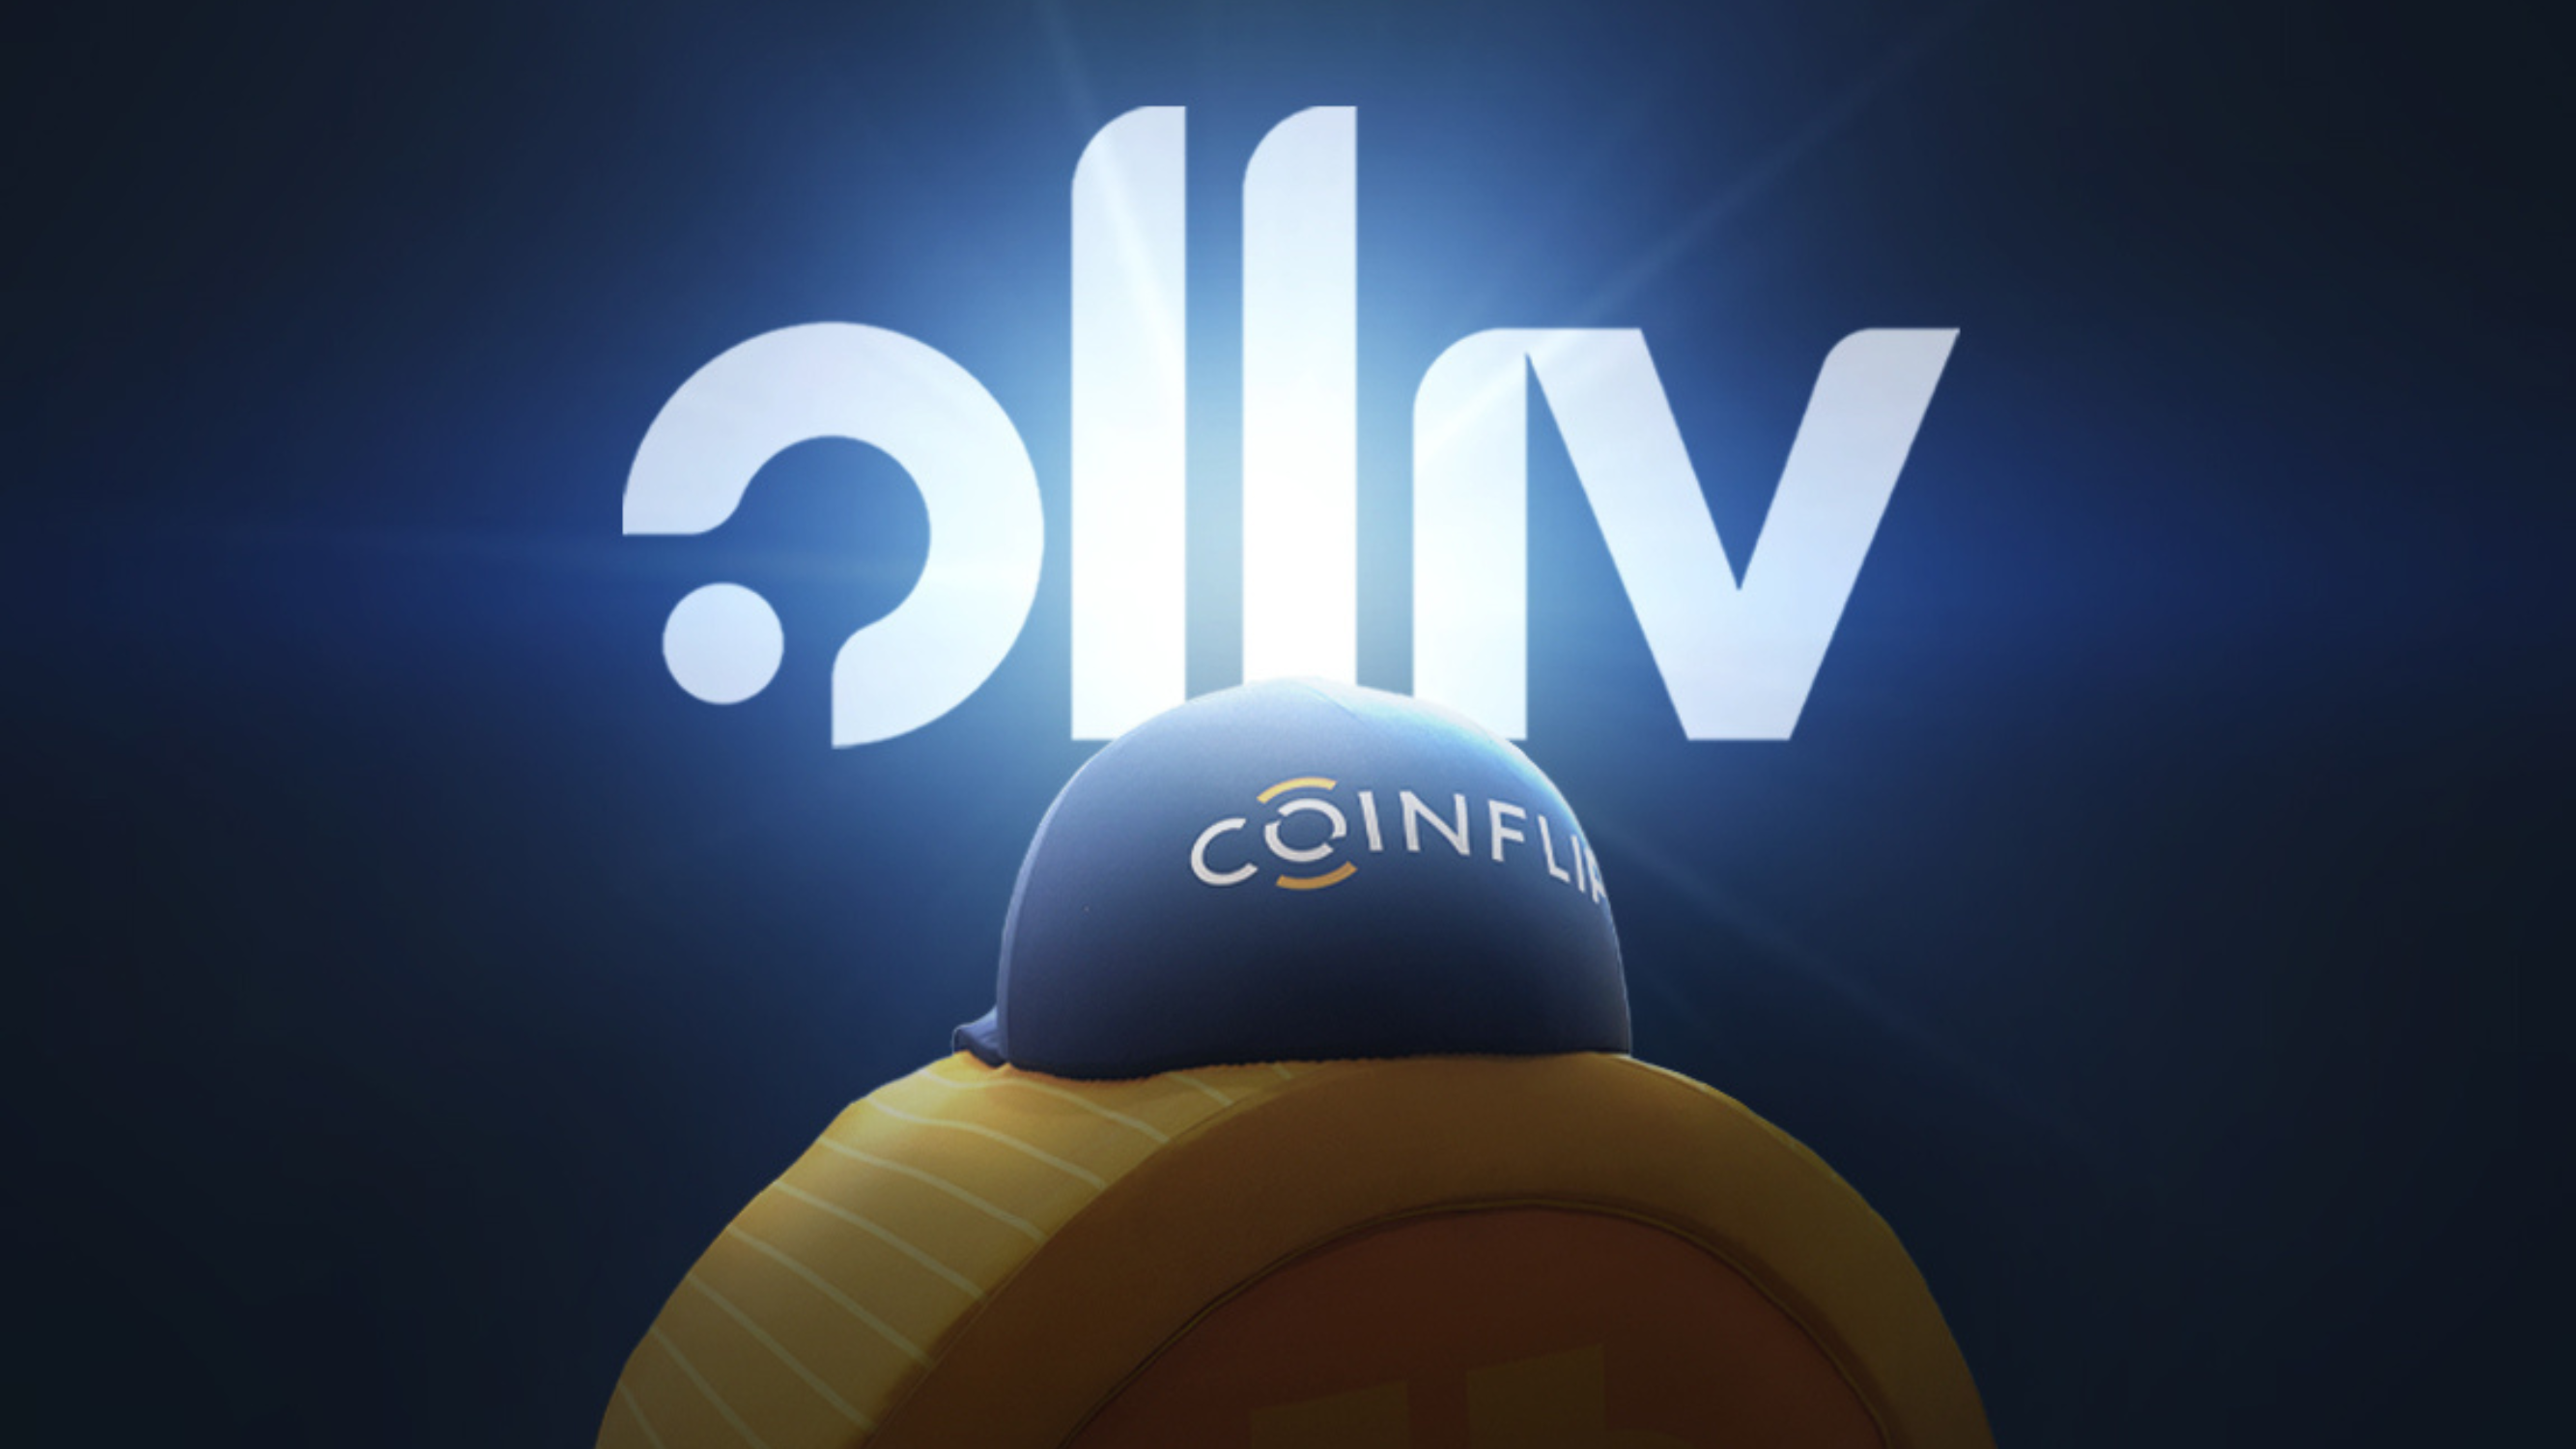 Cover Image for Big news from CoinFlip: Announcing Olliv!